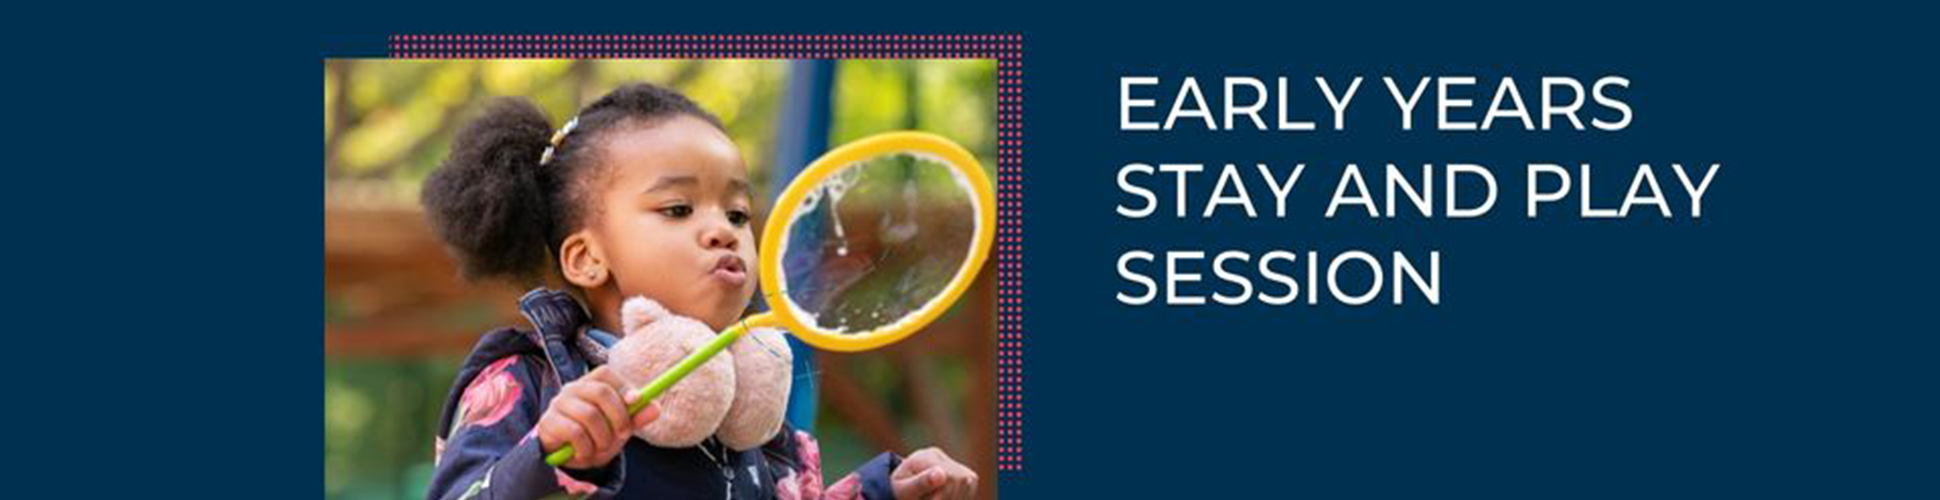 Early Years Stay and Play Session| The British International School Budapest  - Content Page Header